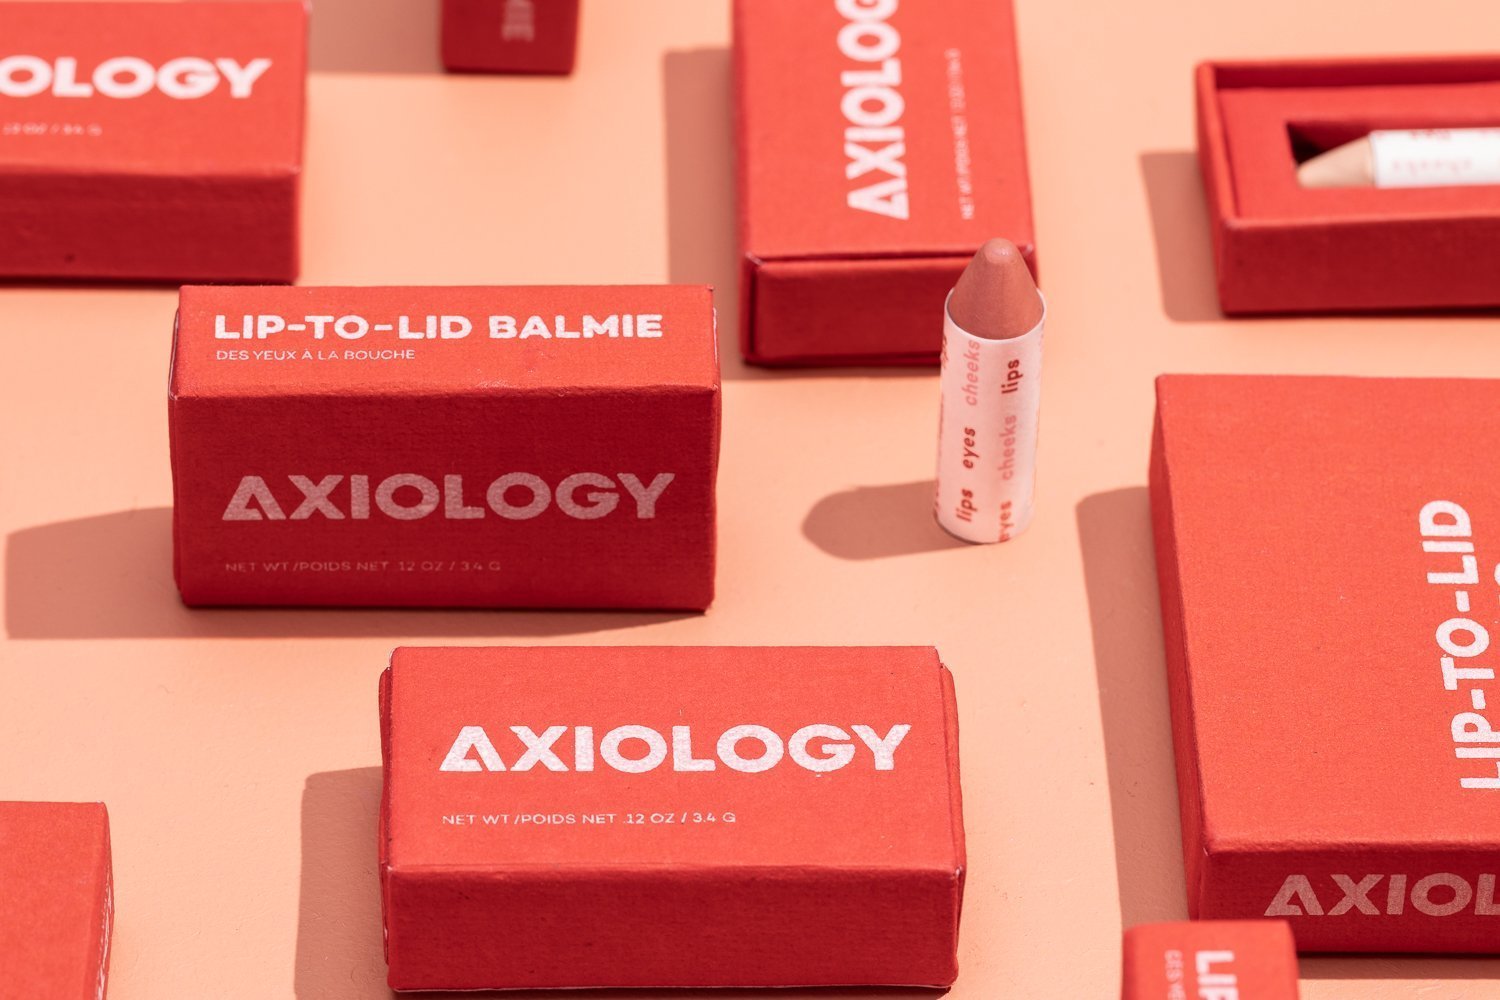 Læge tsunamien udtryk AXIOLOGY | WORLD'S FIRST ZERO WASTE 3-IN-1 COLOR STICKS & CRAYONS – Axiology